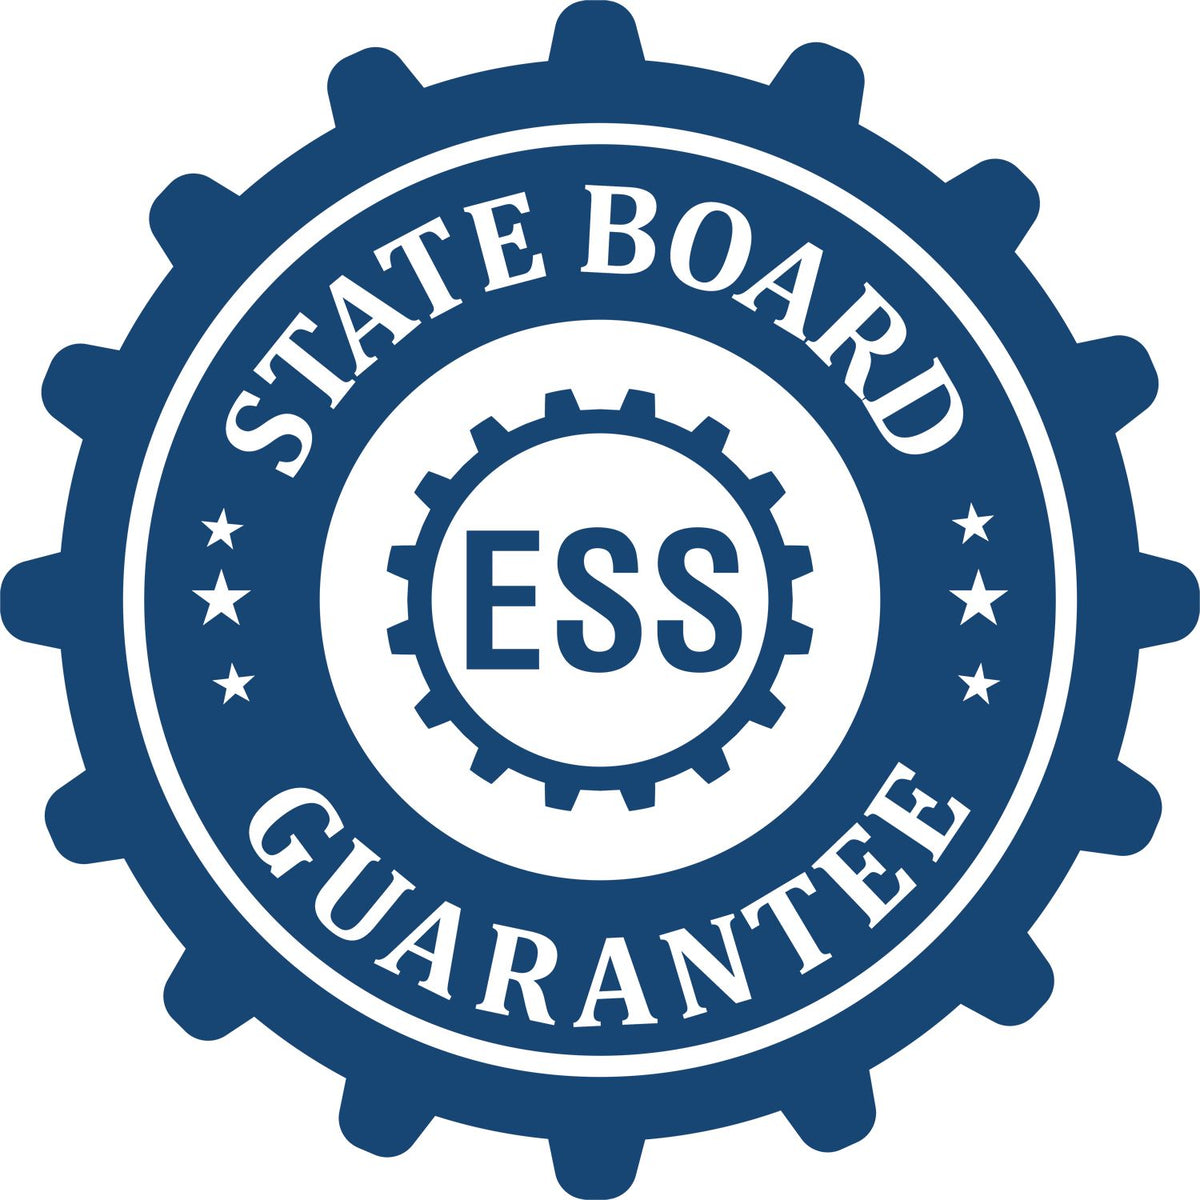 An emblem in a gear shape illustrating a state board guarantee for the Washington Desk Architect Embossing Seal product.